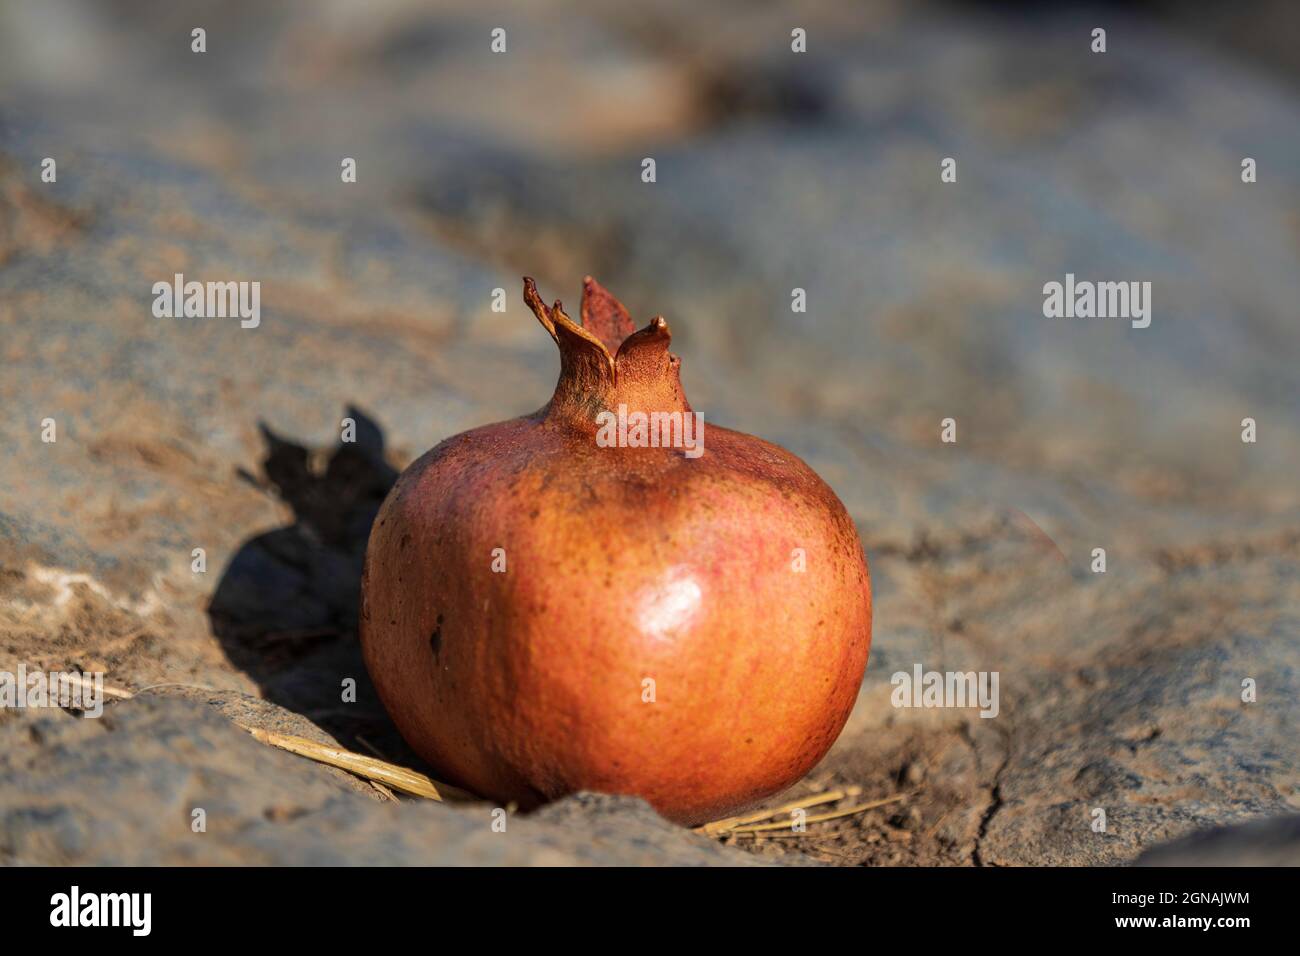 Ripe pomegranate fruit lying on a stone close-up. Selective focus Stock Photo